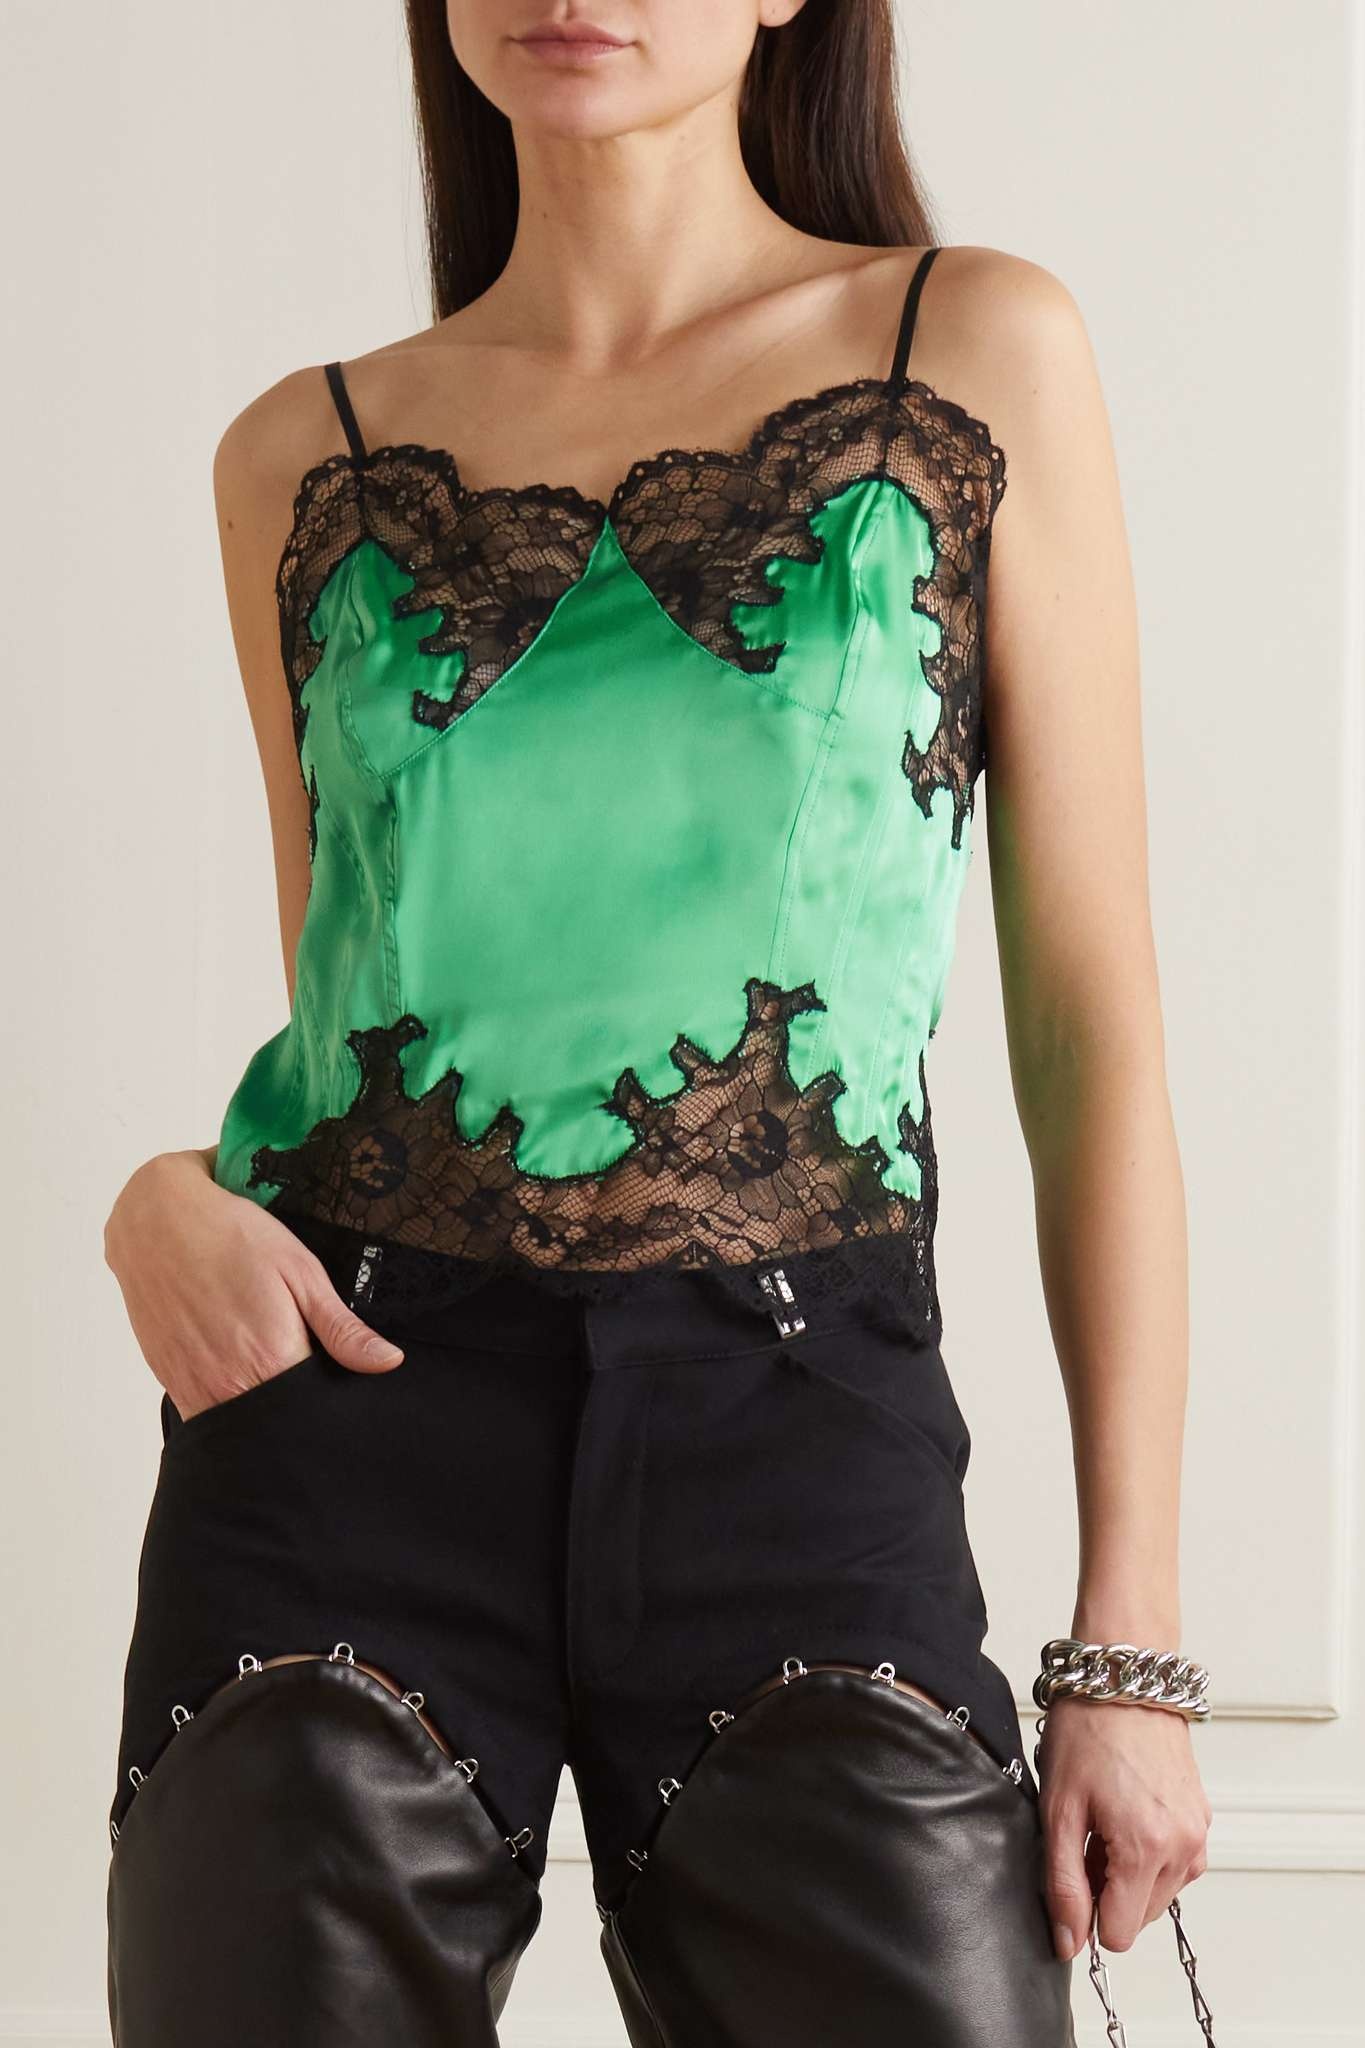 Shop paco rabanne Sleeveless Lace Cropped Tops Tanks & Camisoles